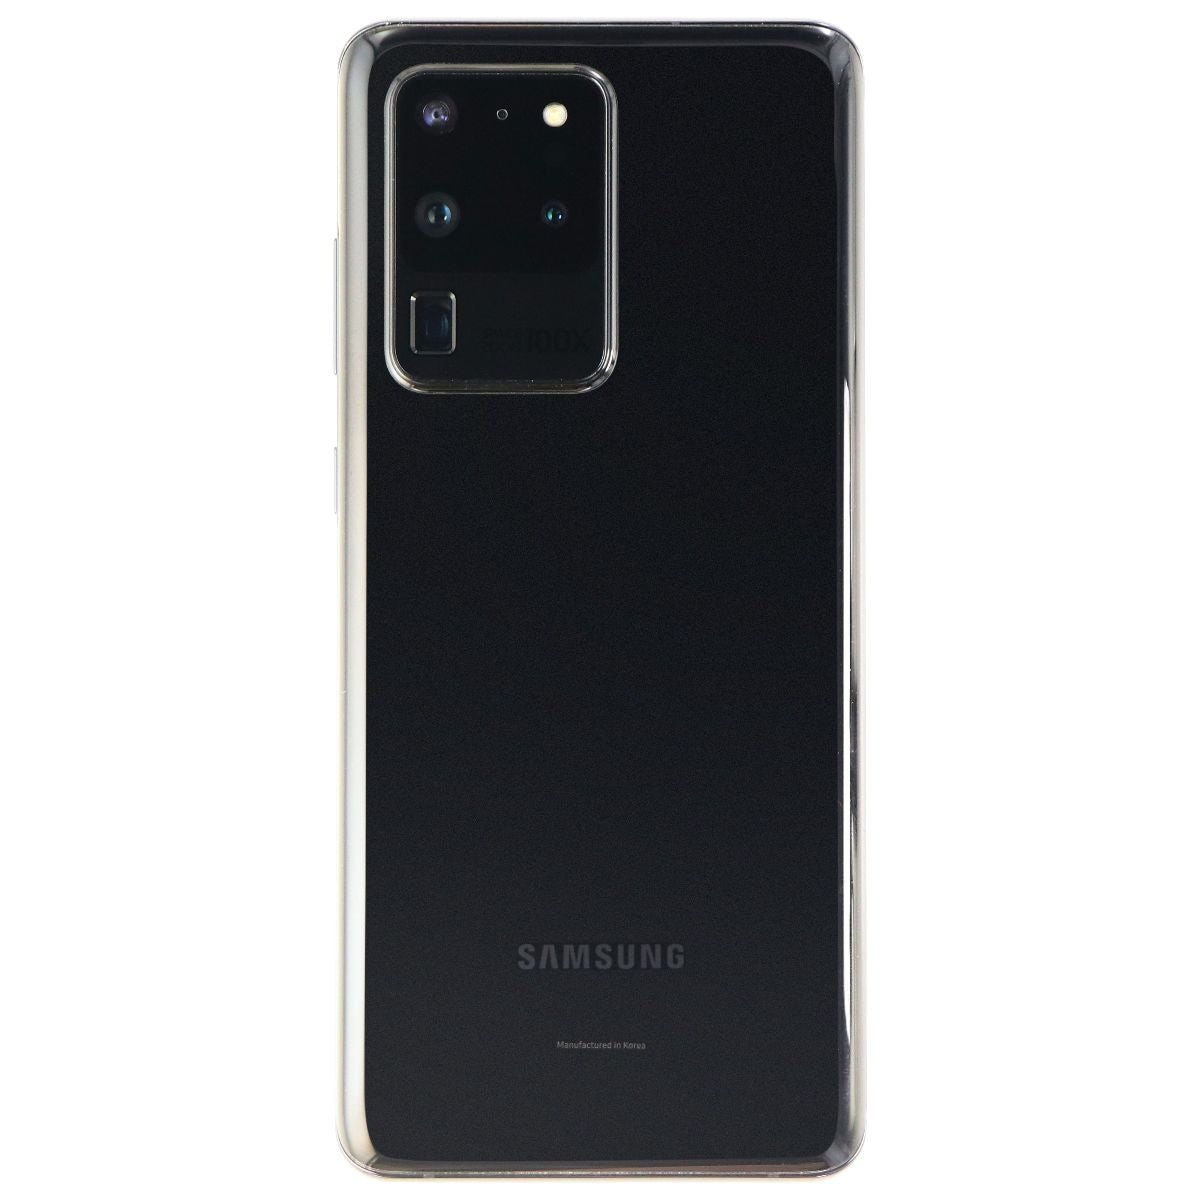 Samsung Galaxy S20 Ultra 5G (6.9-in) (SM-G988U) AT&T Only - 128GB/Cosmic Black Cell Phones & Smartphones Samsung    - Simple Cell Bulk Wholesale Pricing - USA Seller